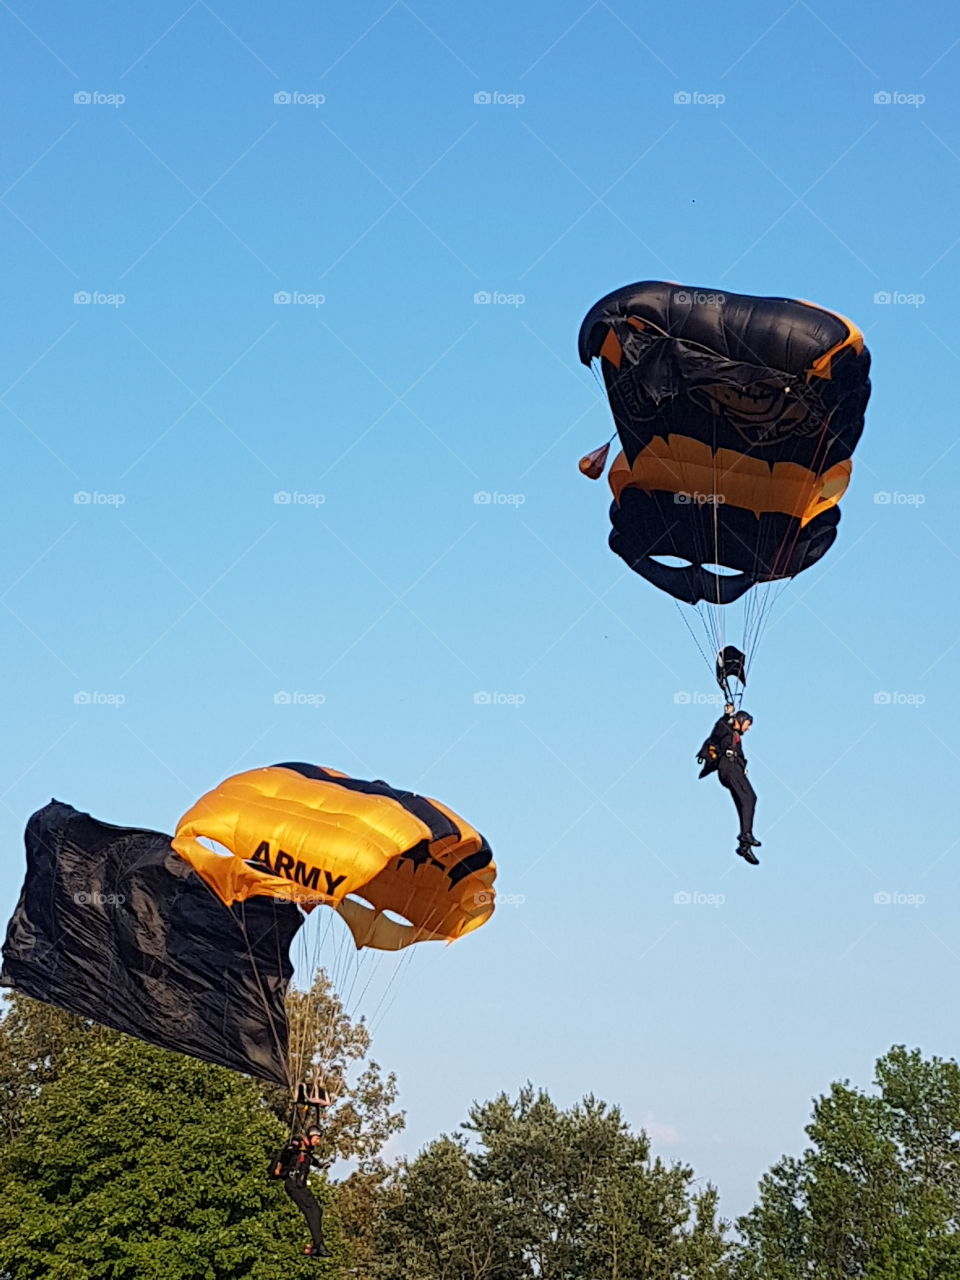 Two US Army Golden Knights parachuting onto the ground from bright blue skies